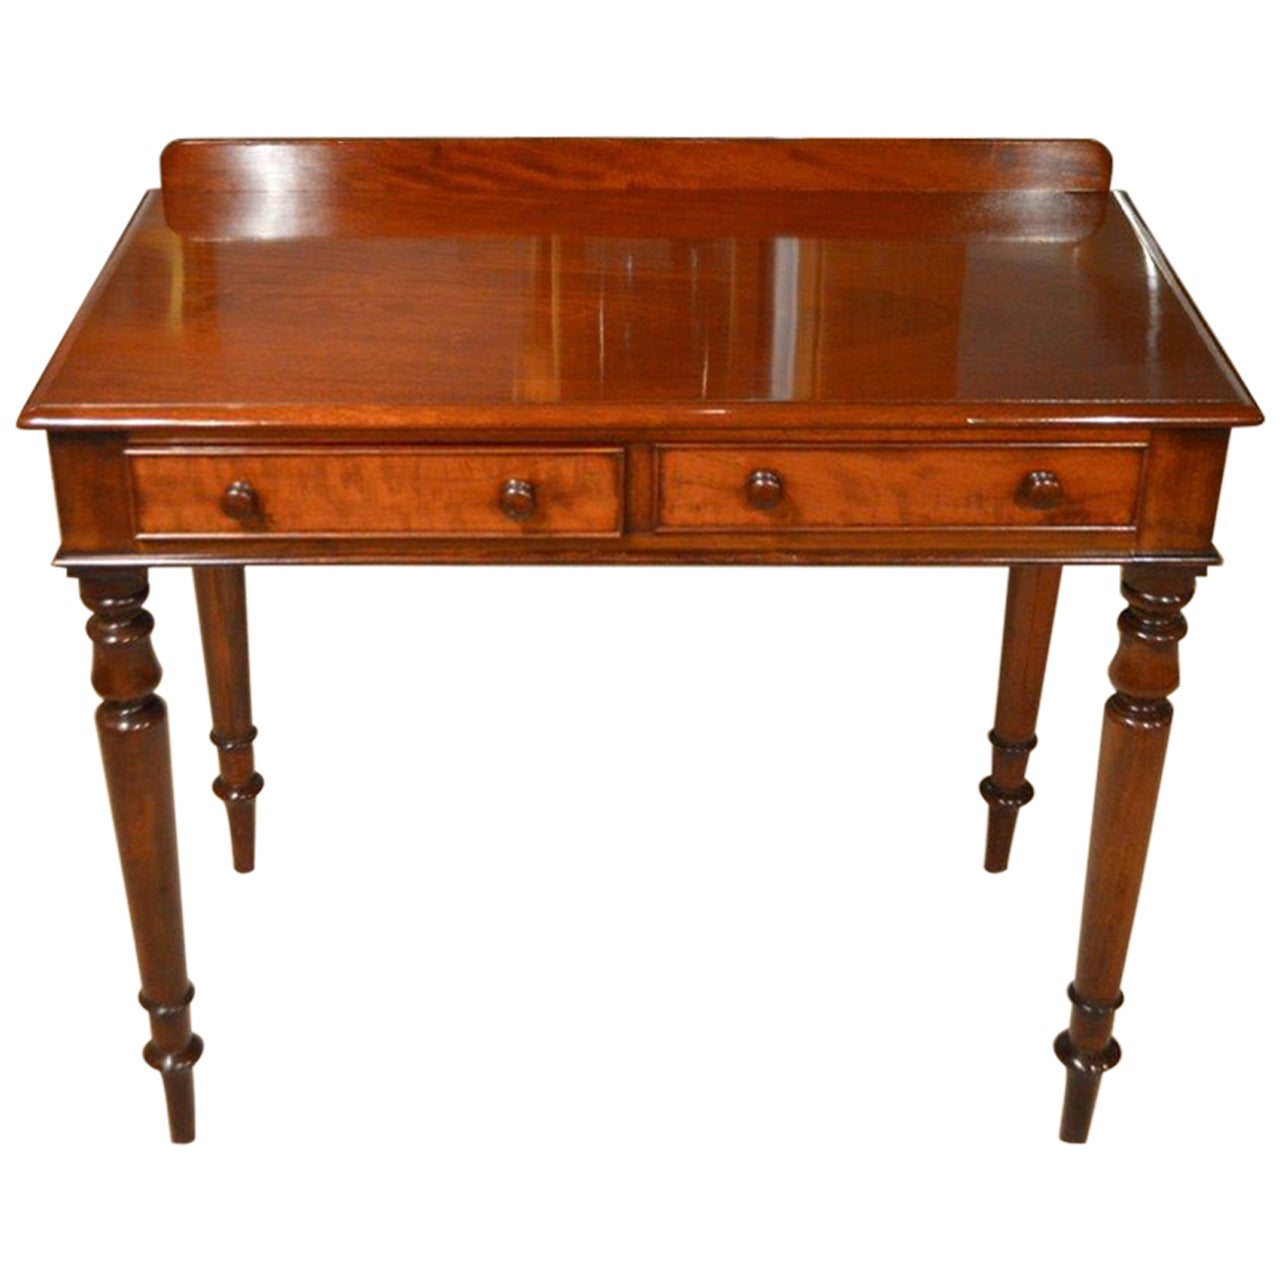 A Mahogany Early Victorian Period Two Drawer Side Table